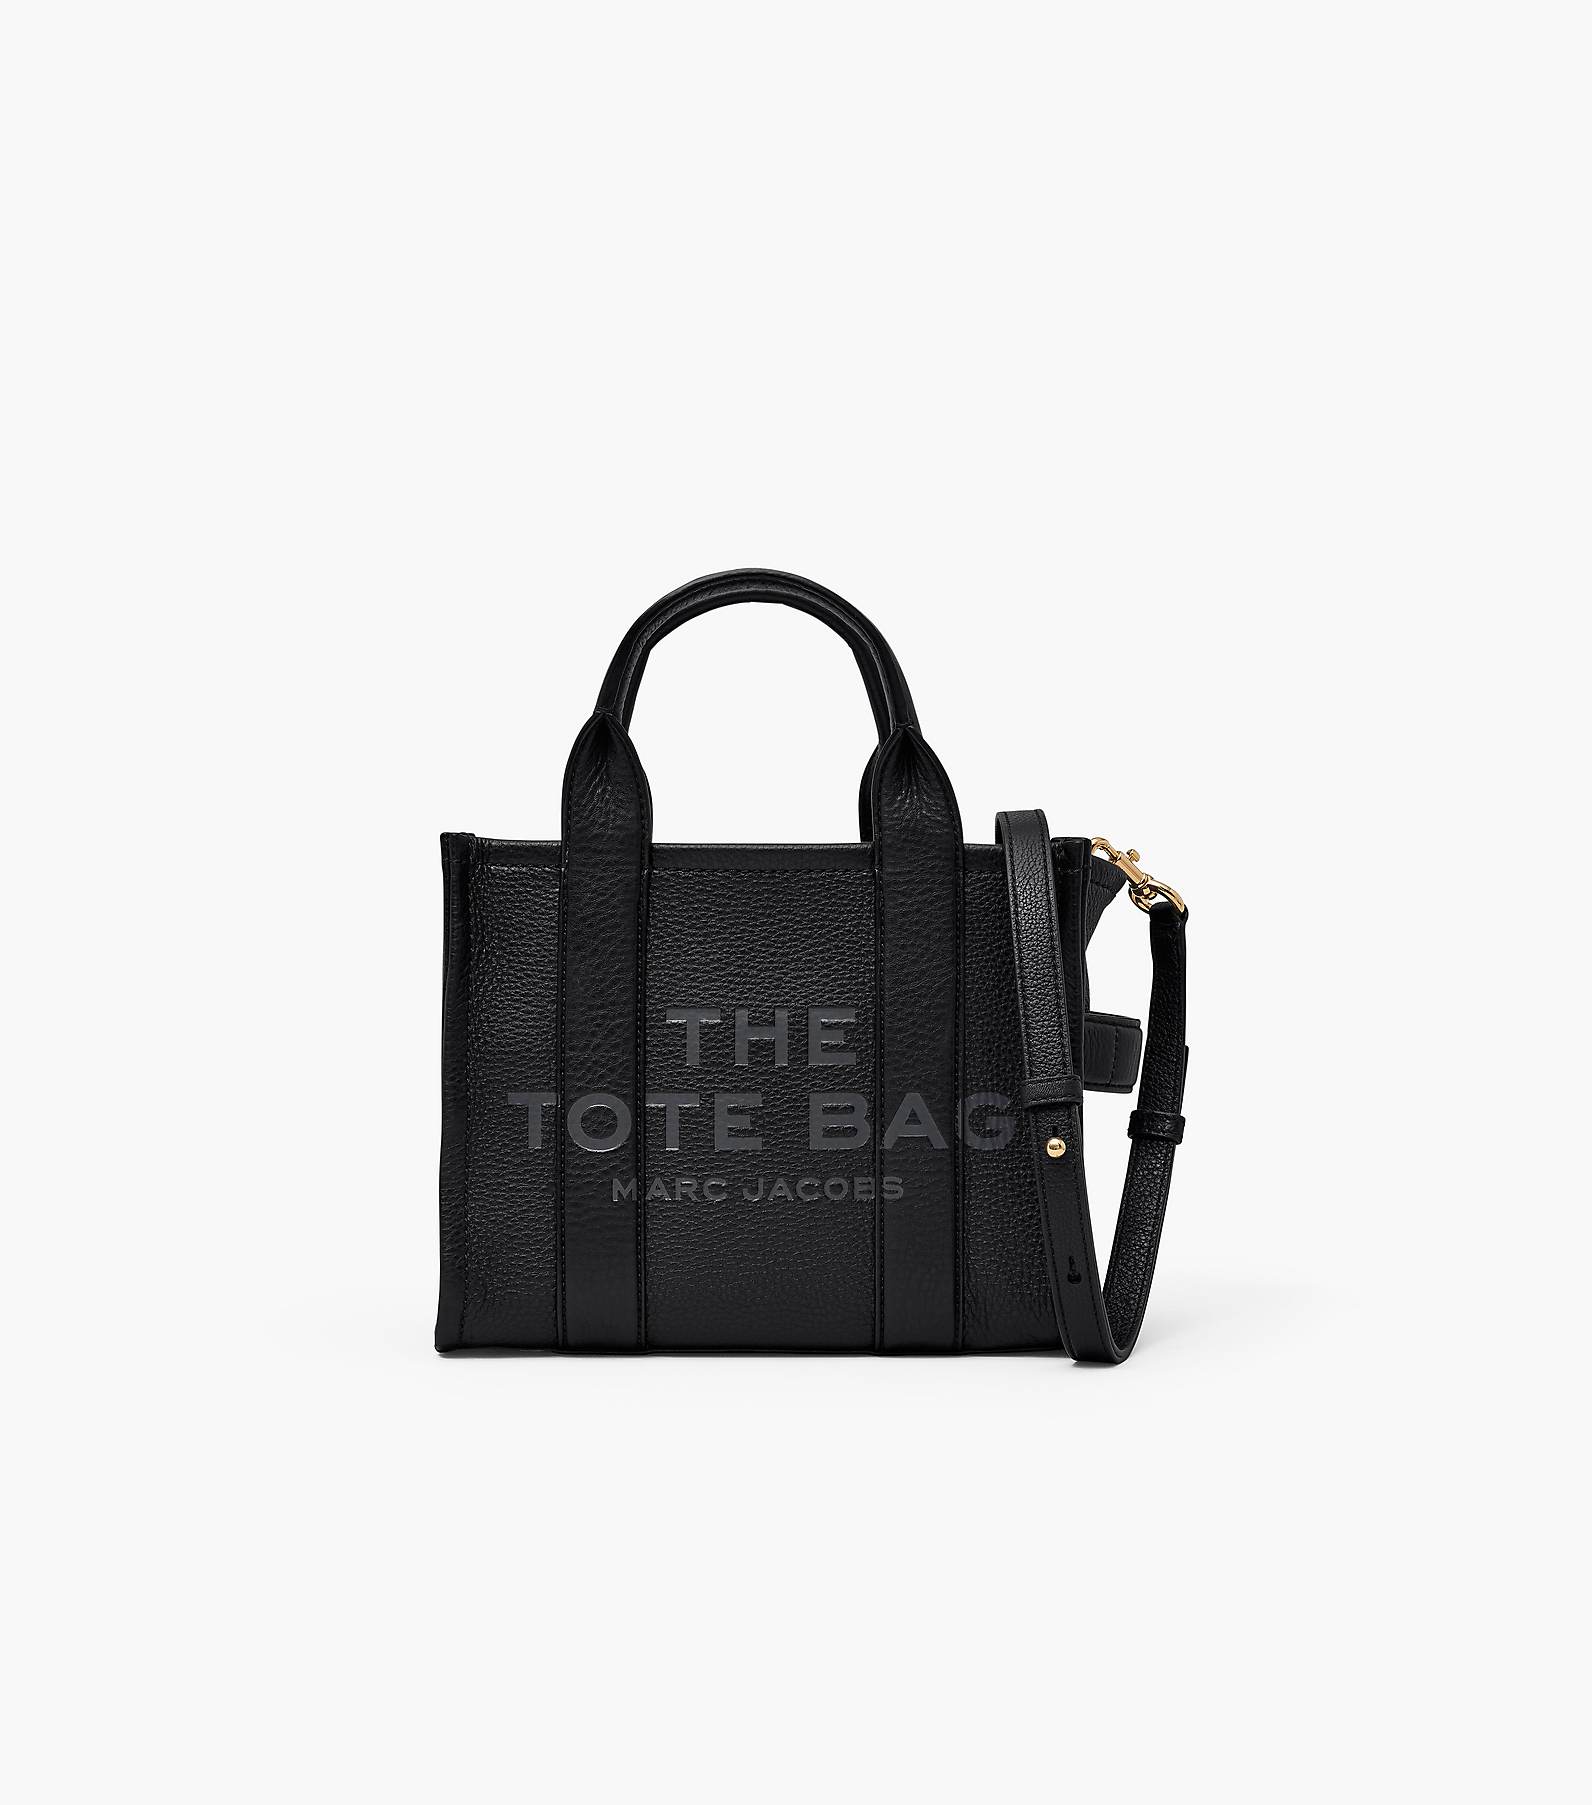 The Tote Bag Marc Jacobs Leather Editionバッグ